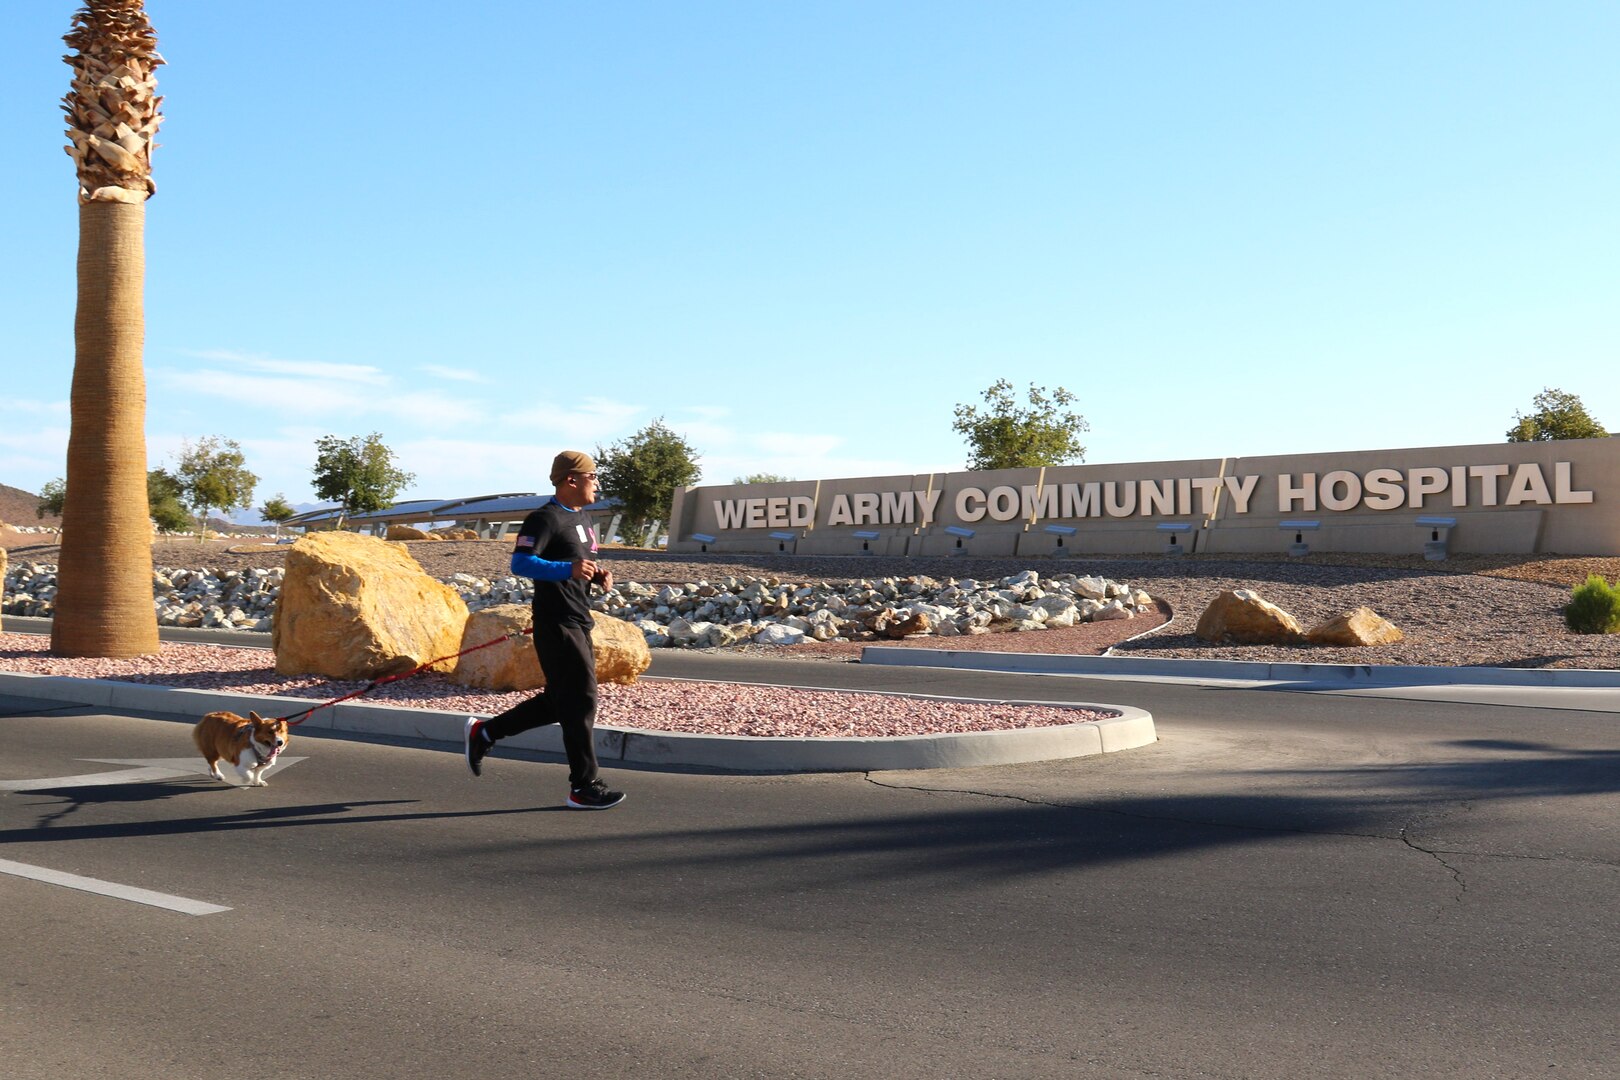 Man with dog running on a road in front of a hospital sign.